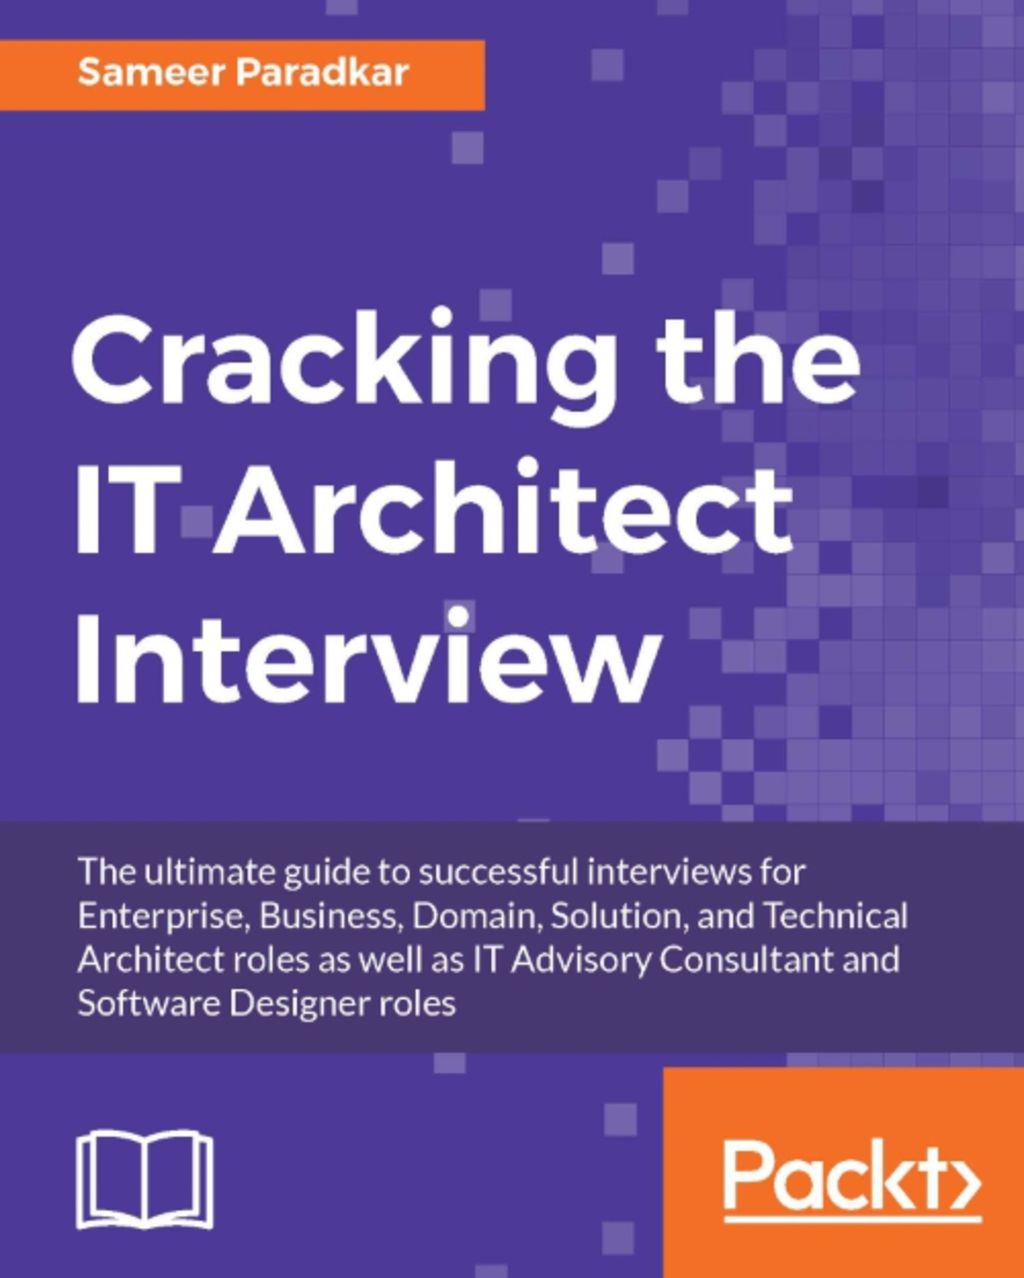 Cracking the IT Architect Interview (eBook) in 2020